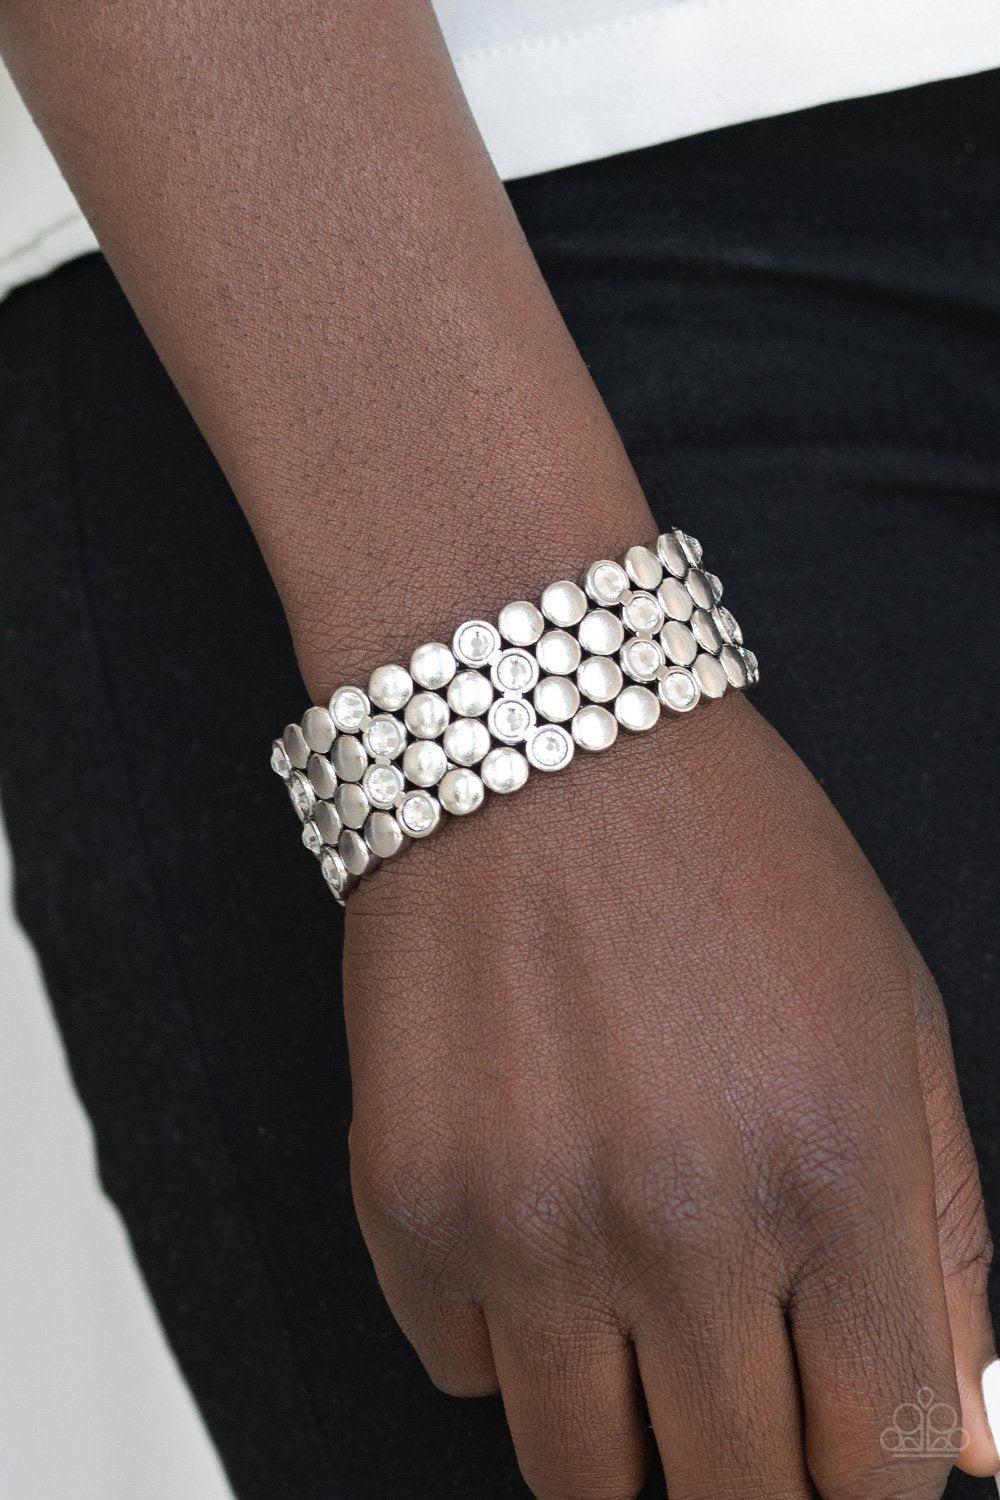 Scattered Starlight White and Silver Stretch Bracelet - Paparazzi Accessories-CarasShop.com - $5 Jewelry by Cara Jewels